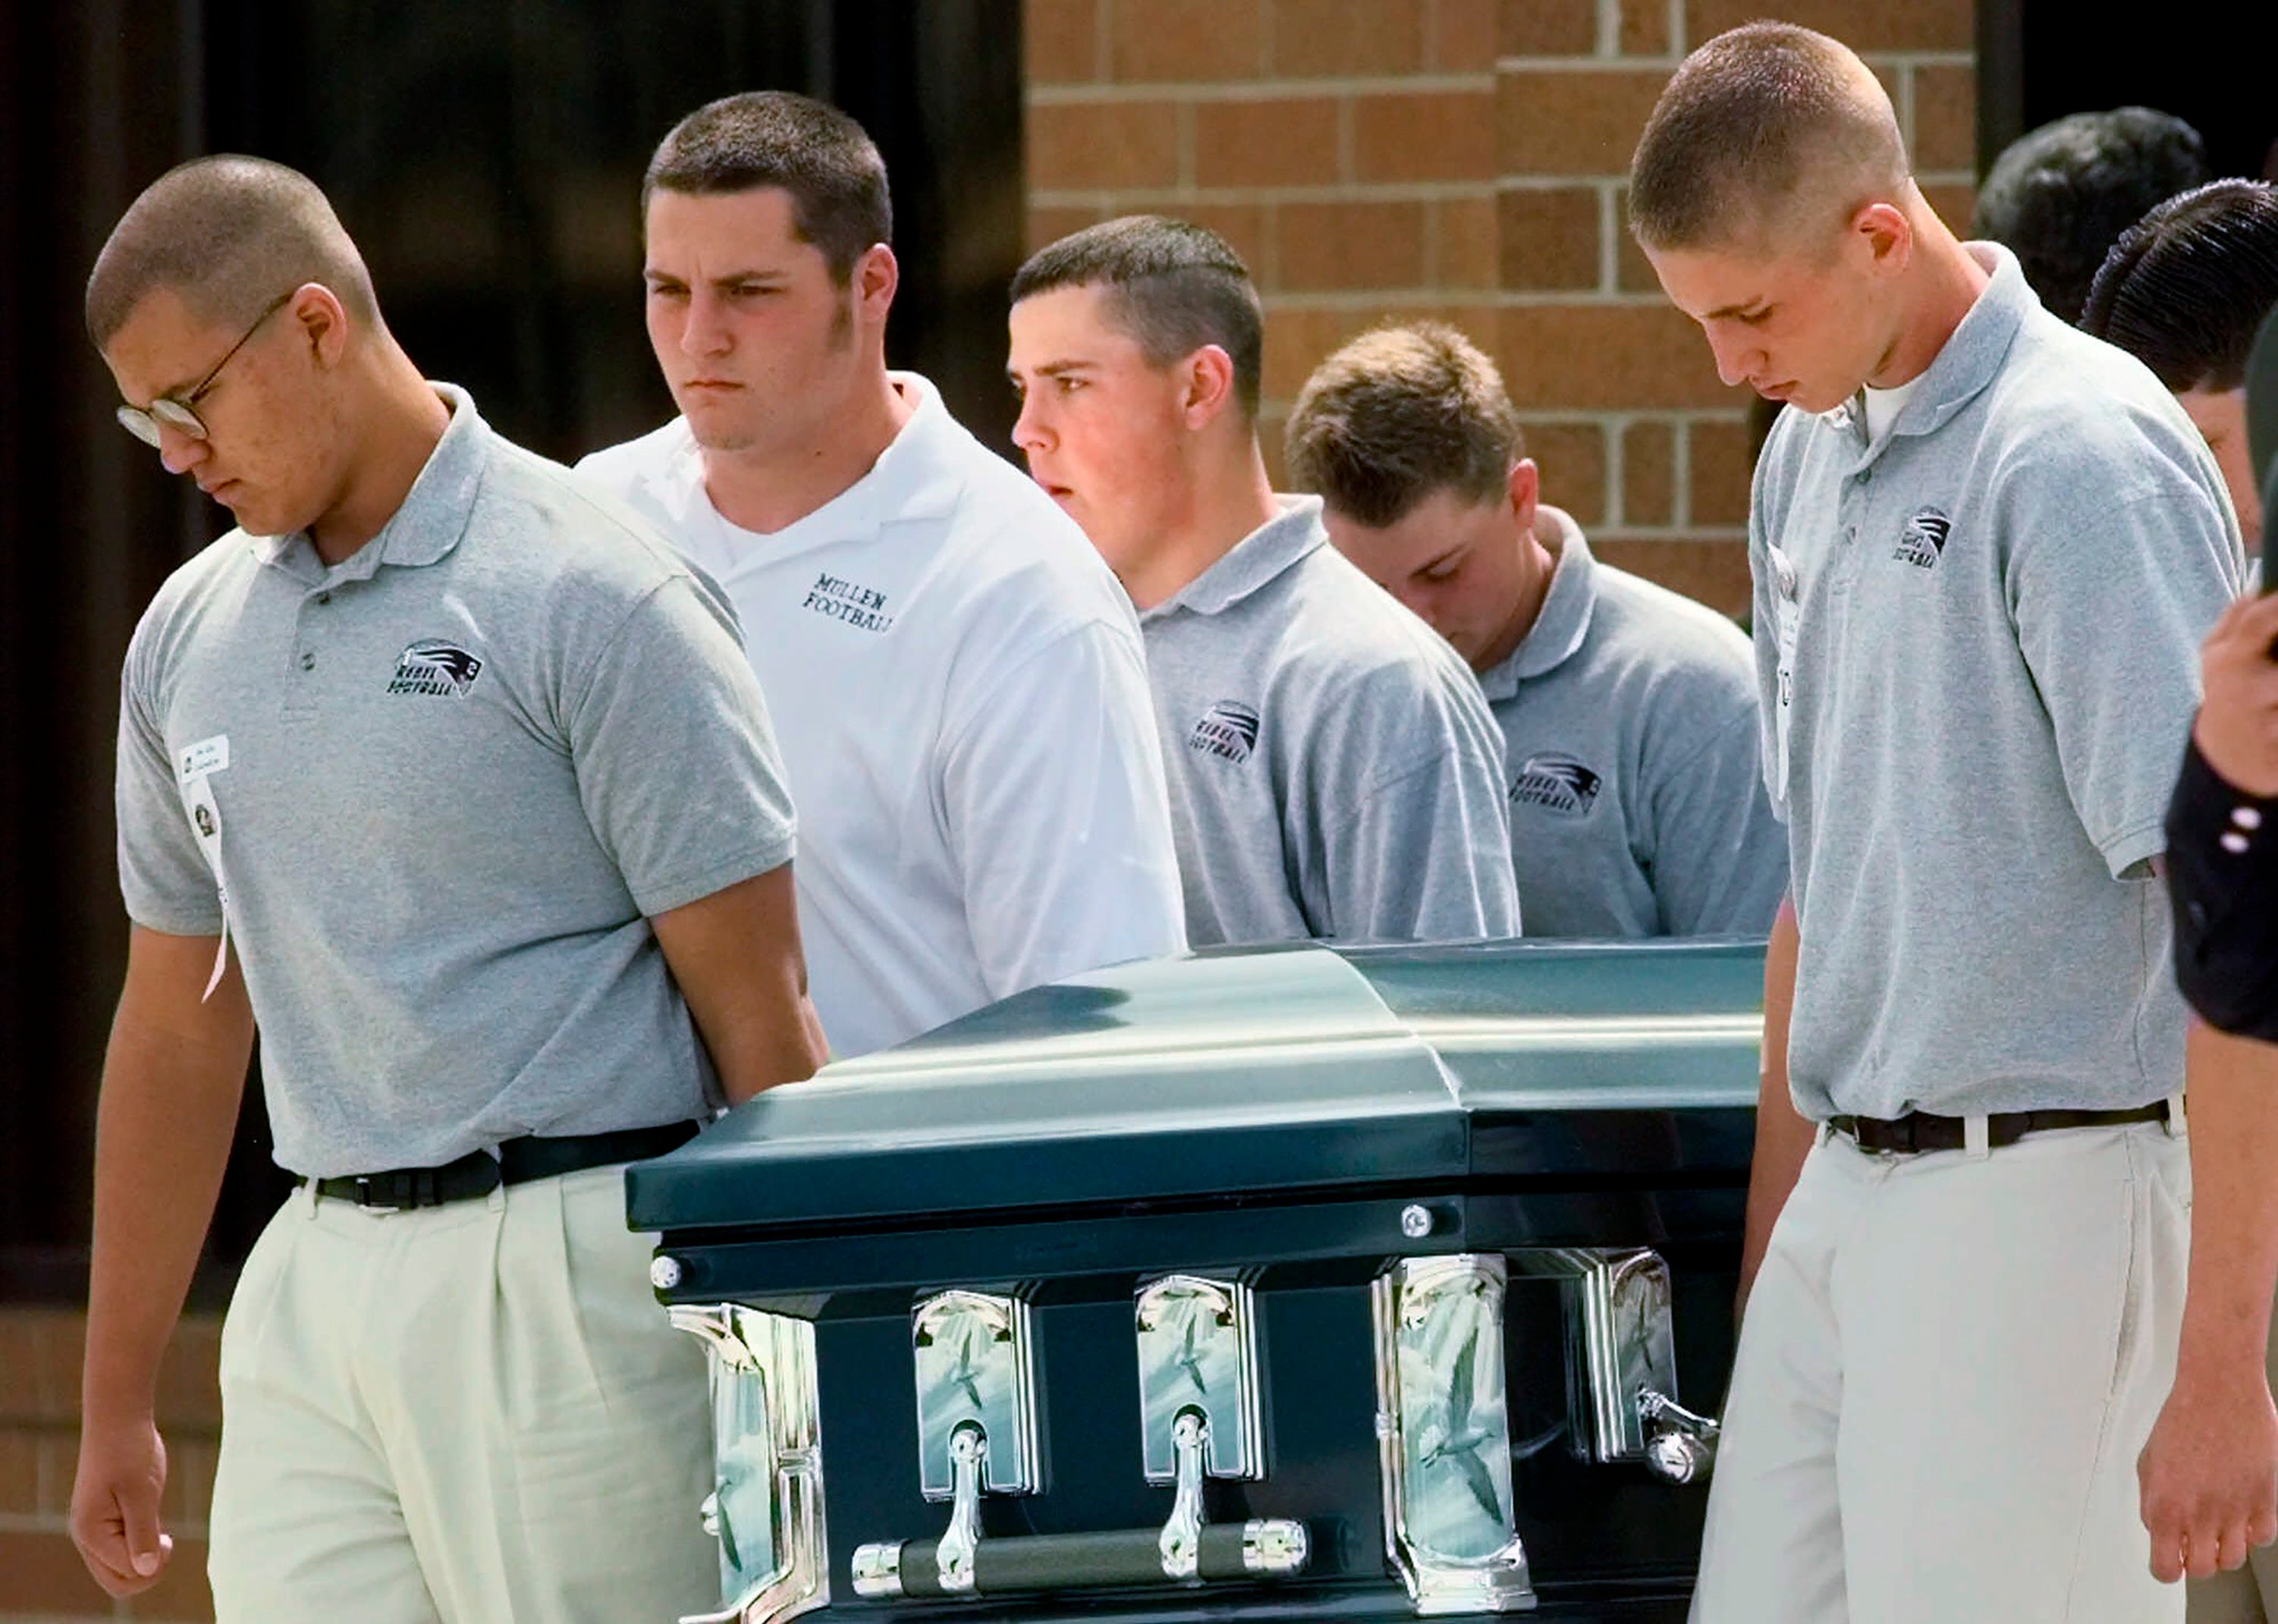 Pallbearers carry the casket of Columbine High School student, Matthew Kechter, out of St. Frances Cabrini Catholic Church in Littleton, one week after the 1999 shooting